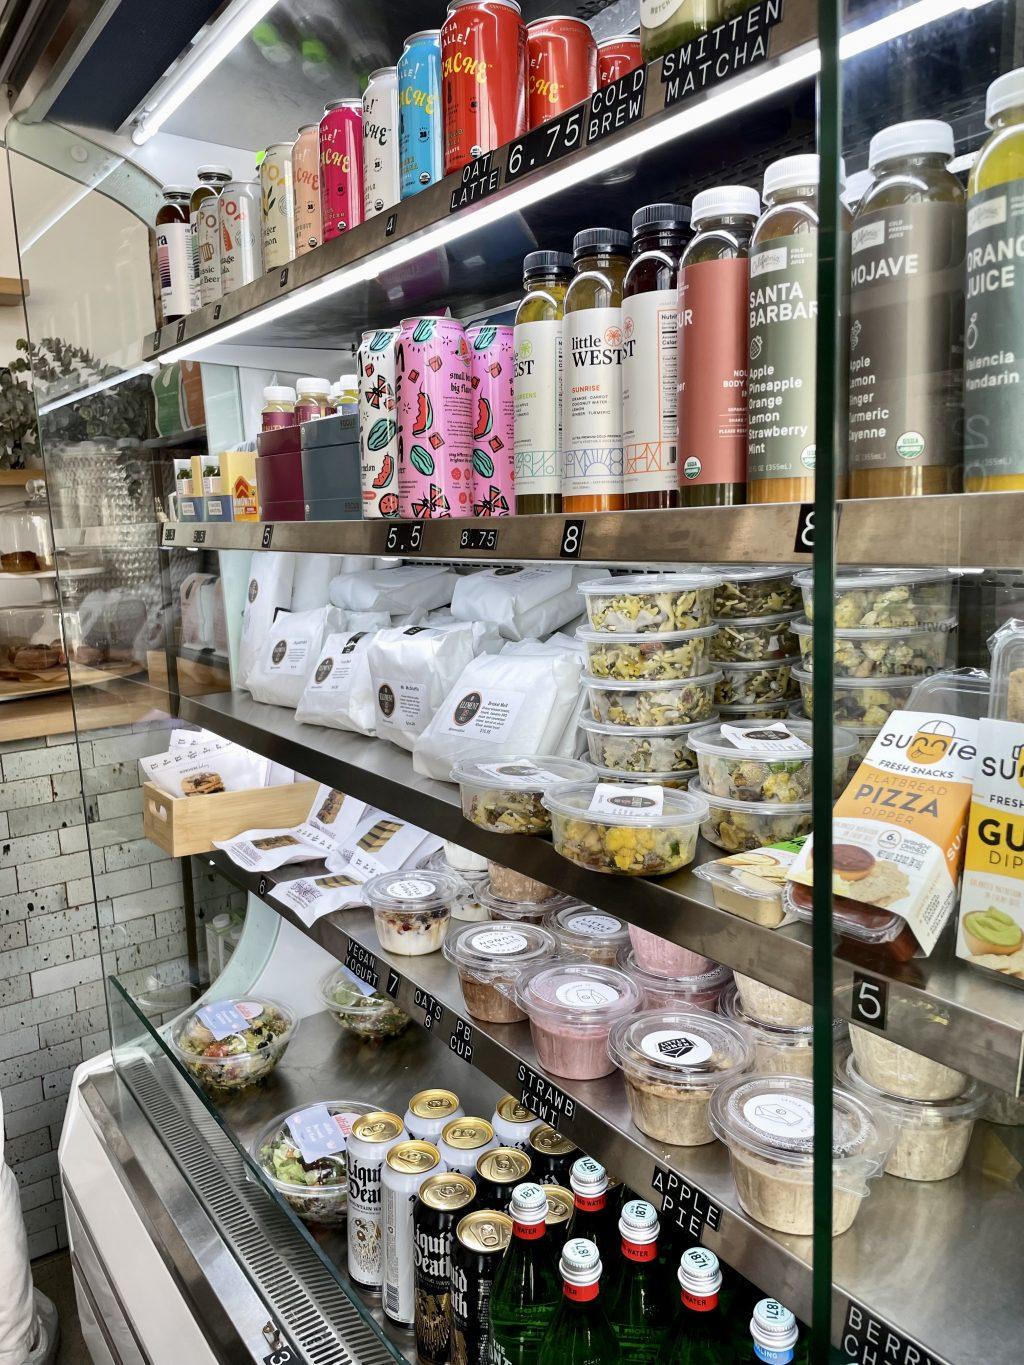 Customers are immediately greeted by the assortment of food options in the cafés' cold case. Little Lunch offered a combination of overnight oats, chia pudding, paninis, burritos, salads, pasta sides and beverages available as pre-made meals.